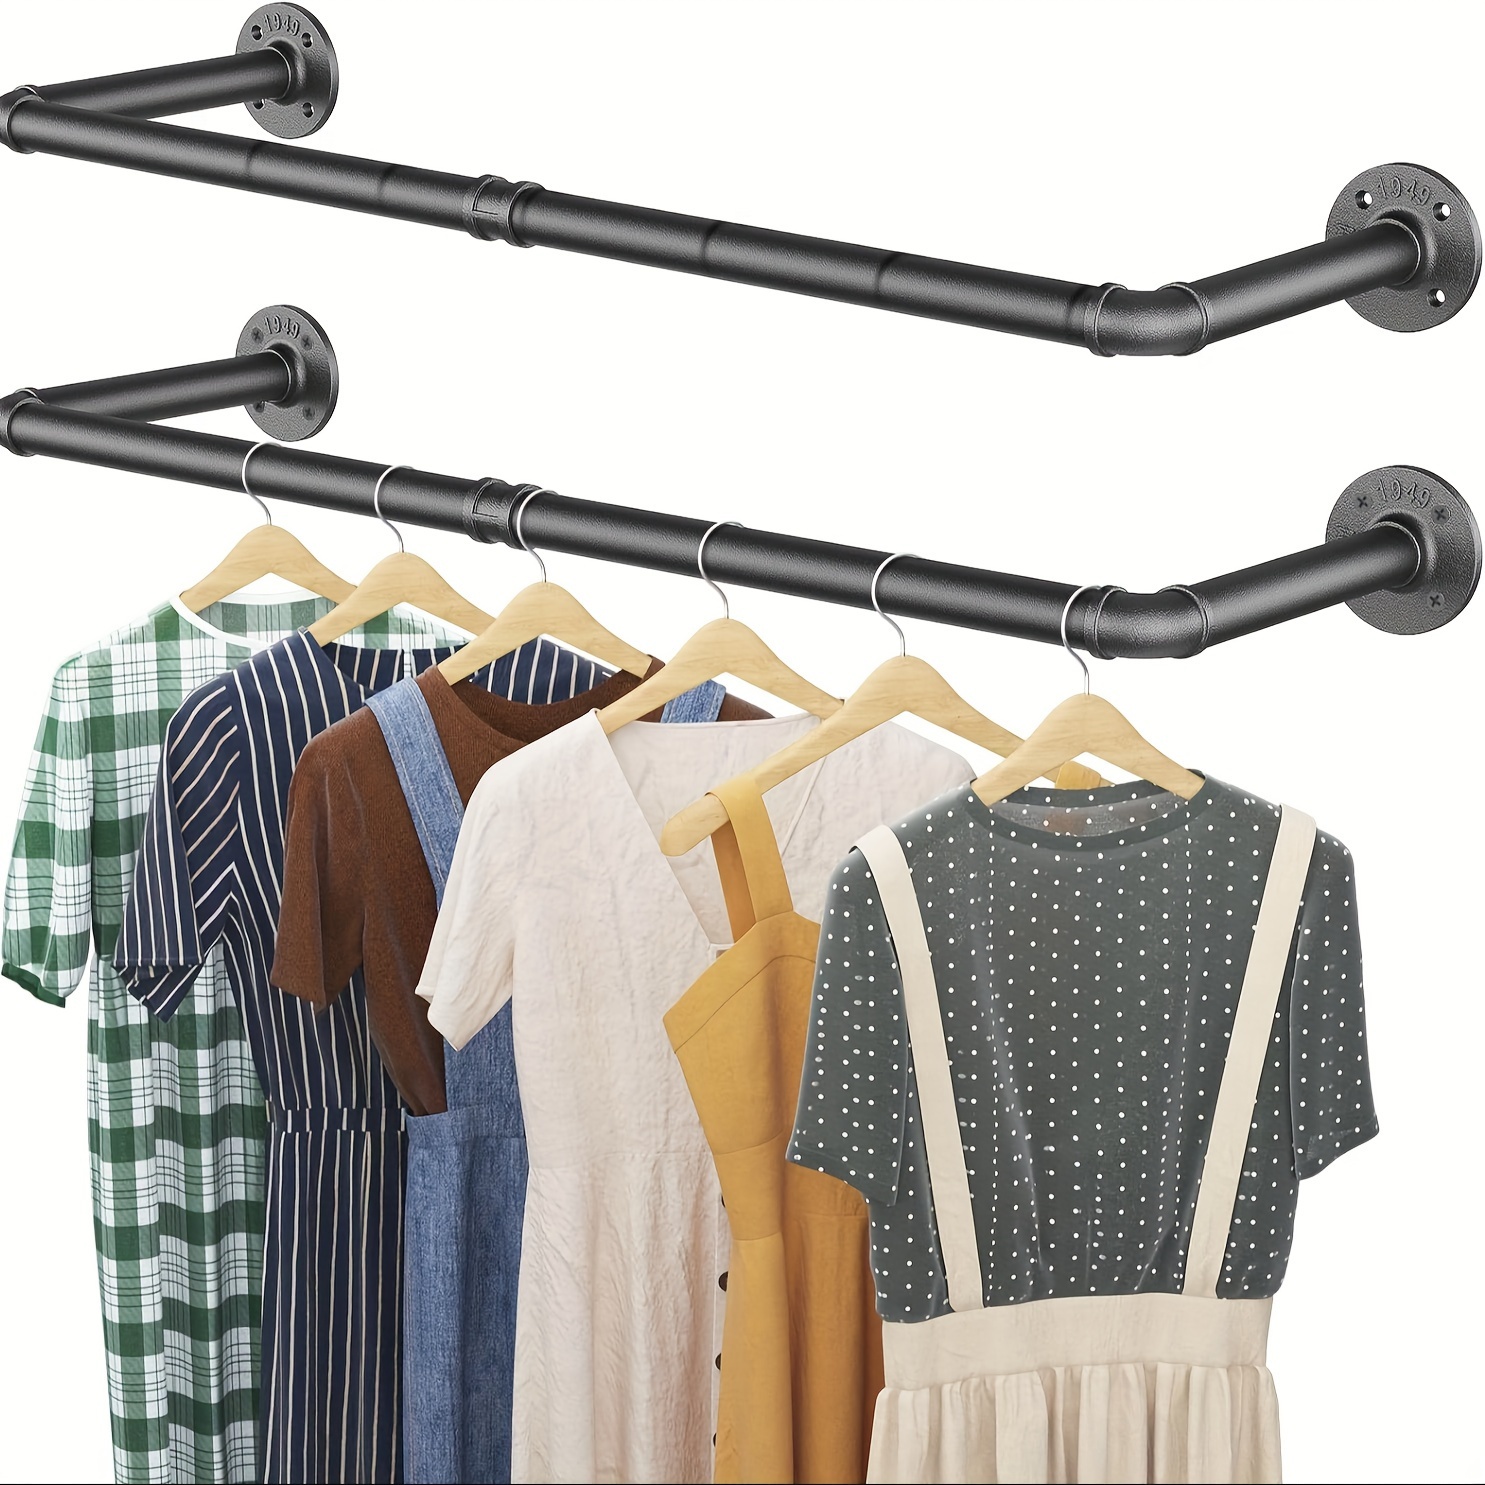 

Industrial Pipe Clothes Rack Wall Mounted Set Of 2, 38.4 Inches Heavy Duty Iron Pipe Clothing Garment Rail, Multi-purpose Clothing Hanging Rod For Laundry Room And Closet Storage Black